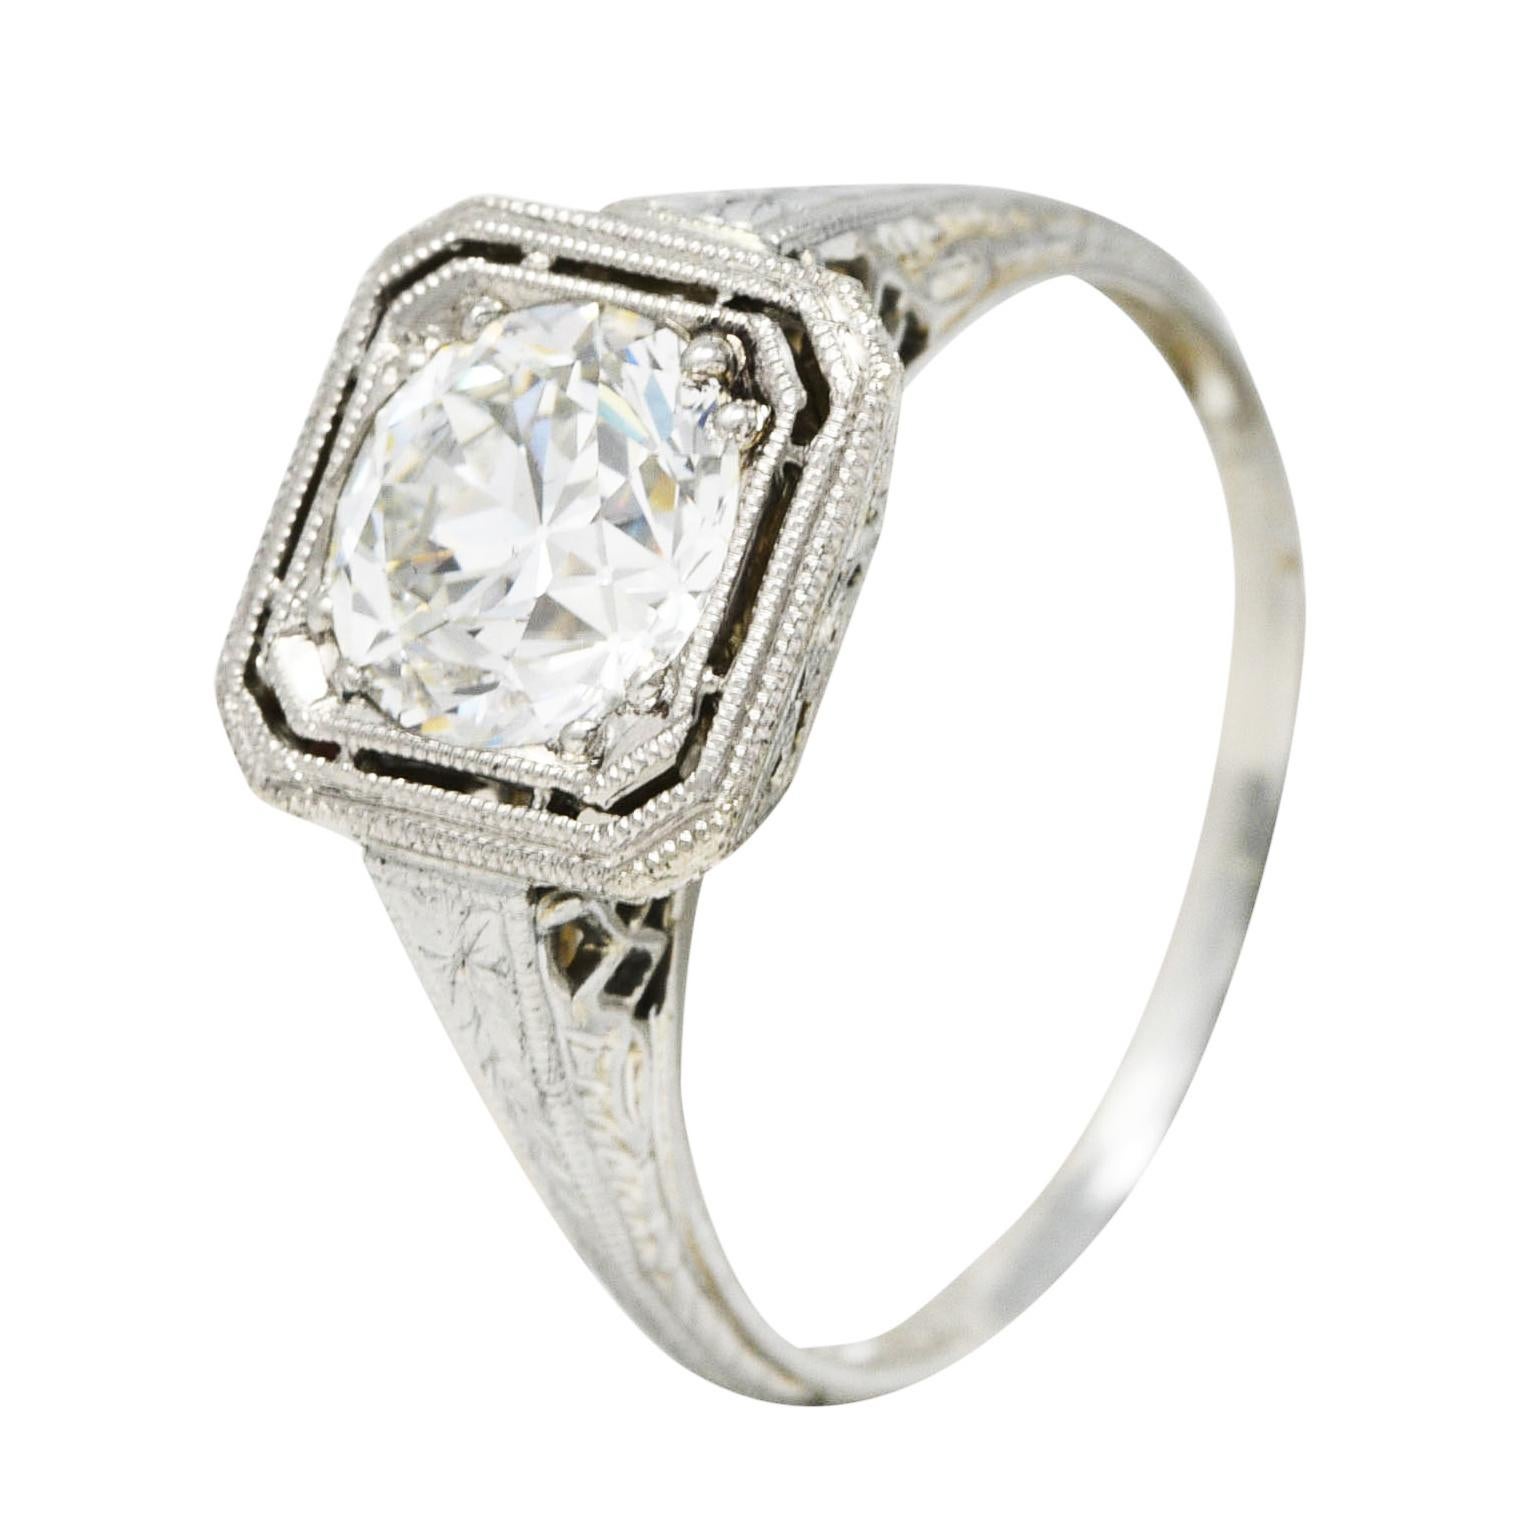 Centering an old European cut diamond weighing 1.34 carat total - J color with SI1 clarity. Bead set in an octagonal form head with milgrain surround. Flanked by engraved wheat motif shoulders. Accented by a pierced lattice style gallery. Tested as